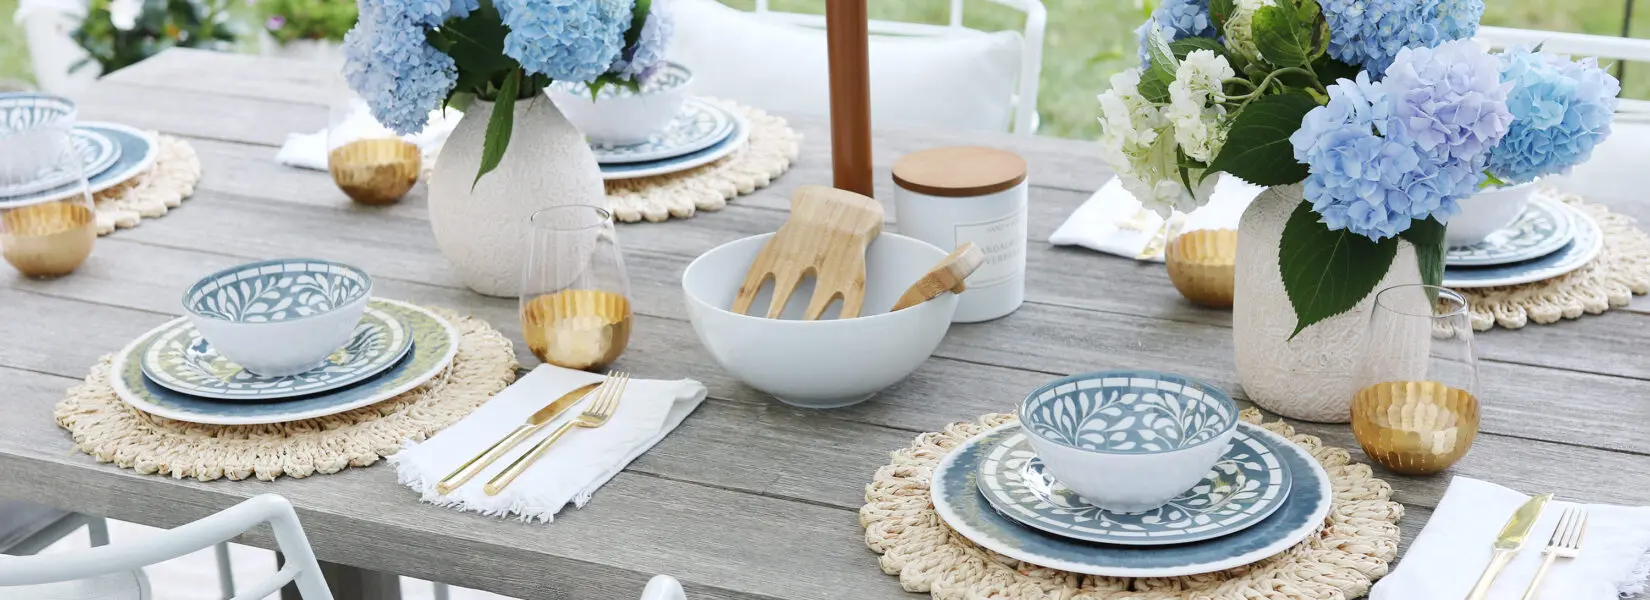 Outdoor Dining Tips and Tricks